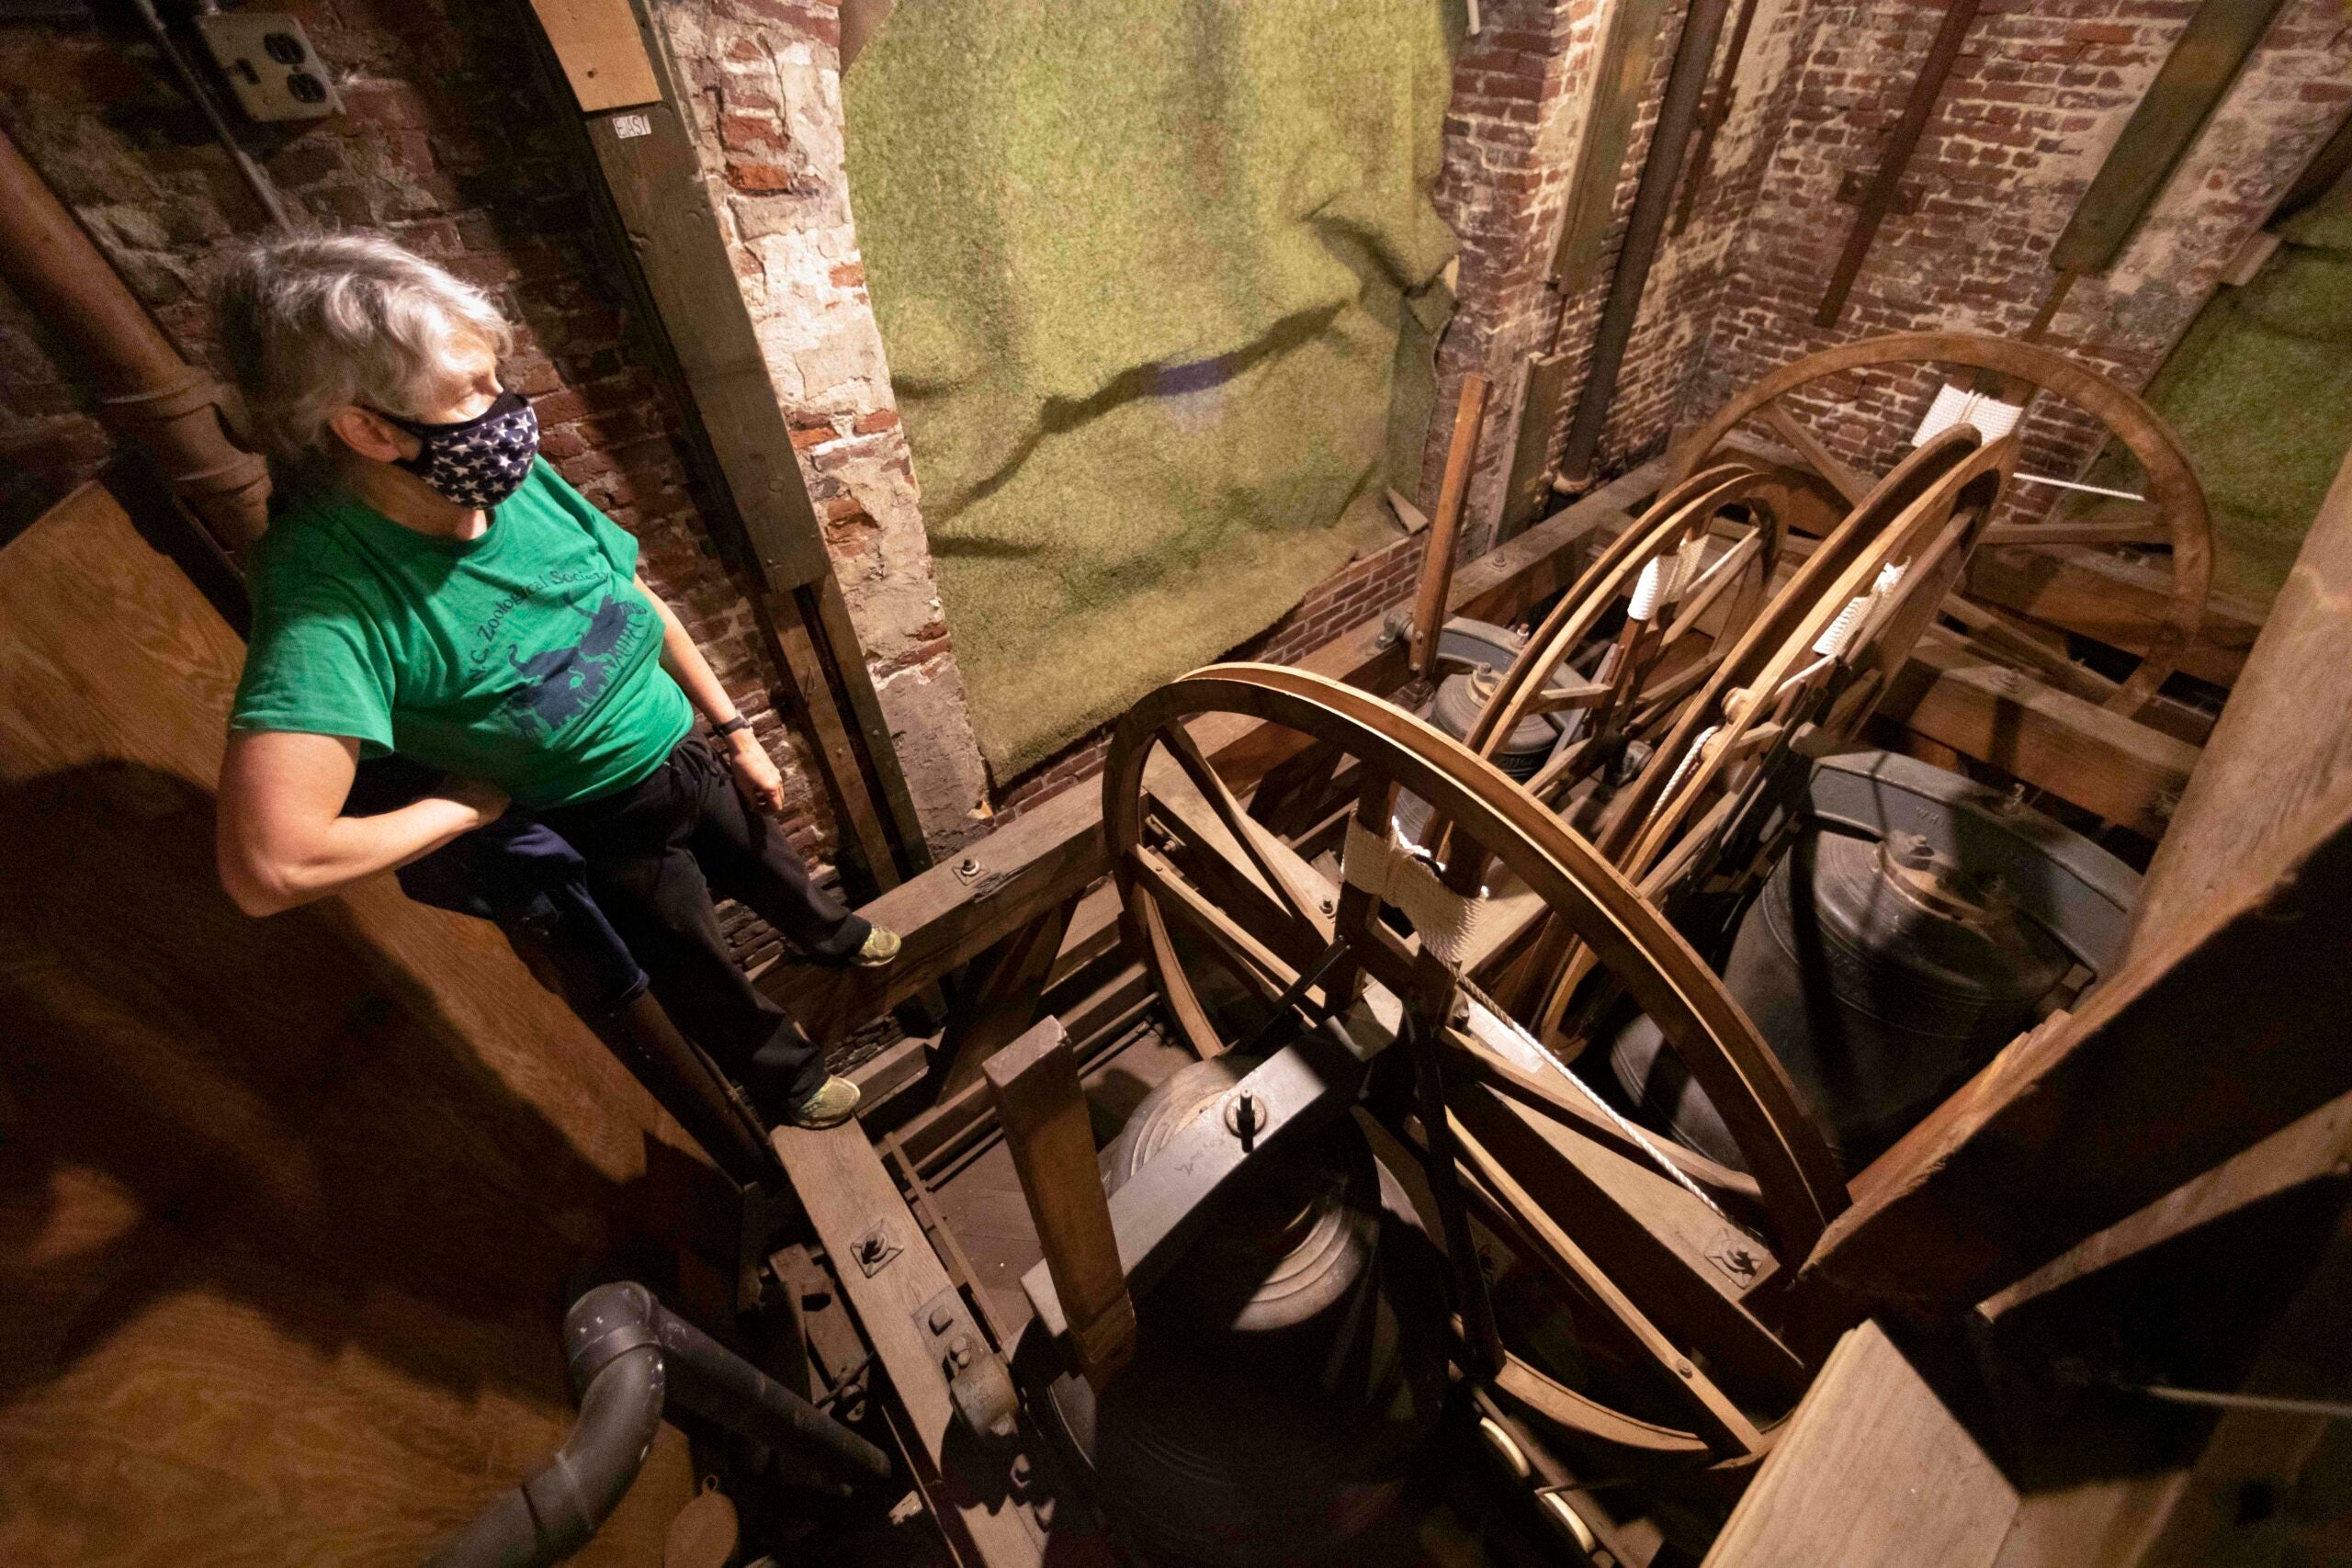 Detroit church bell rings for first time in 25 years after restoration  project